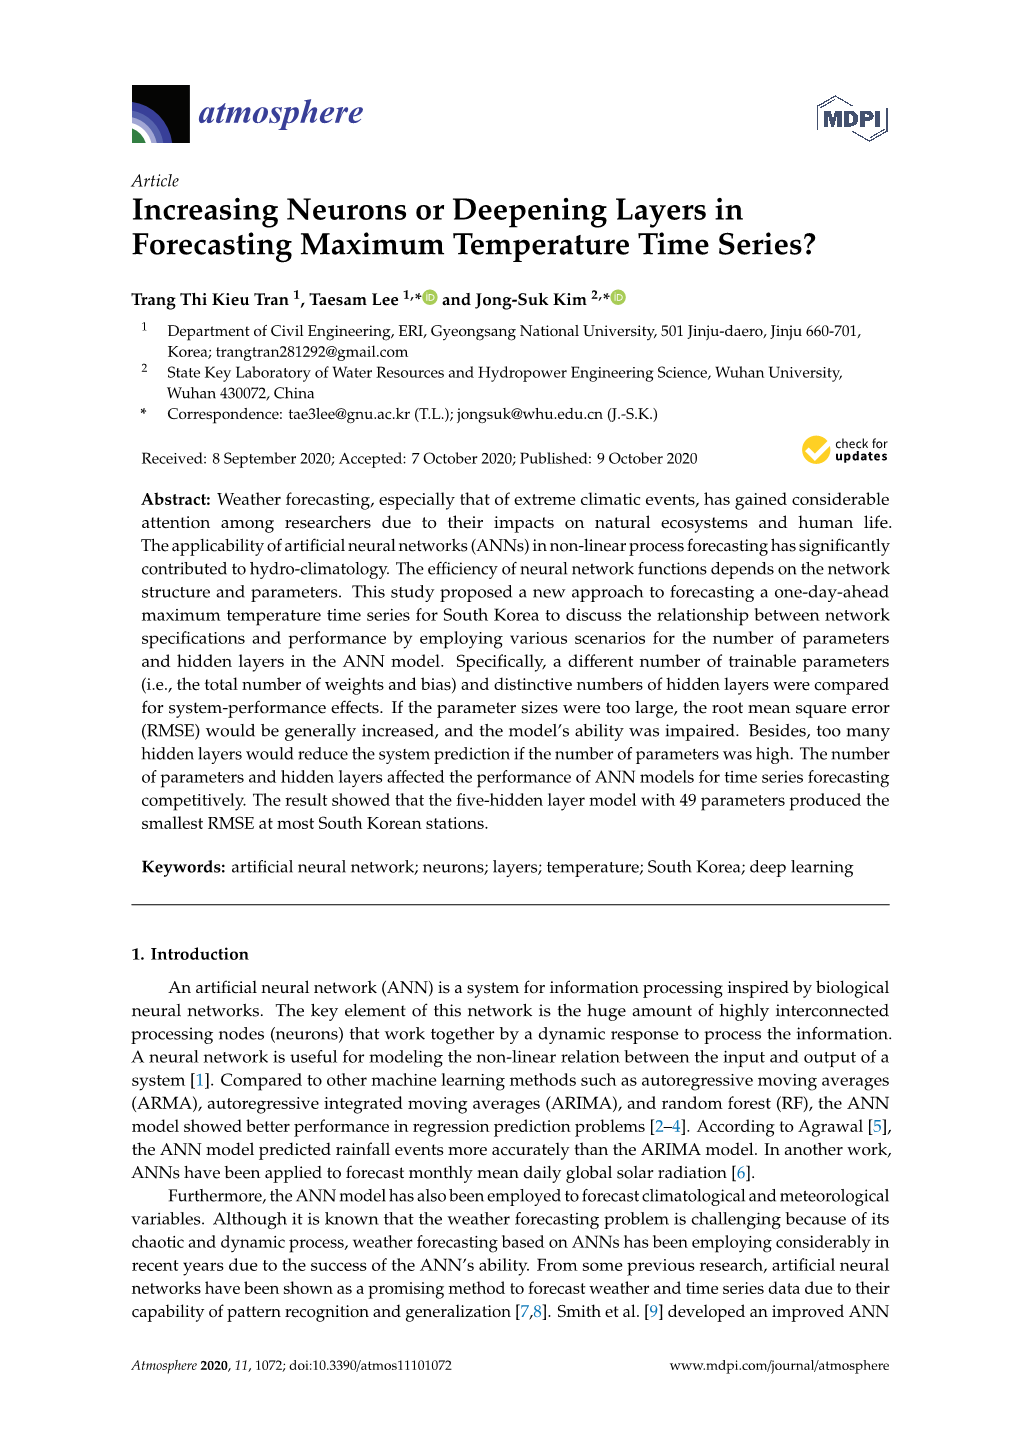 Increasing Neurons Or Deepening Layers in Forecasting Maximum Temperature Time Series?